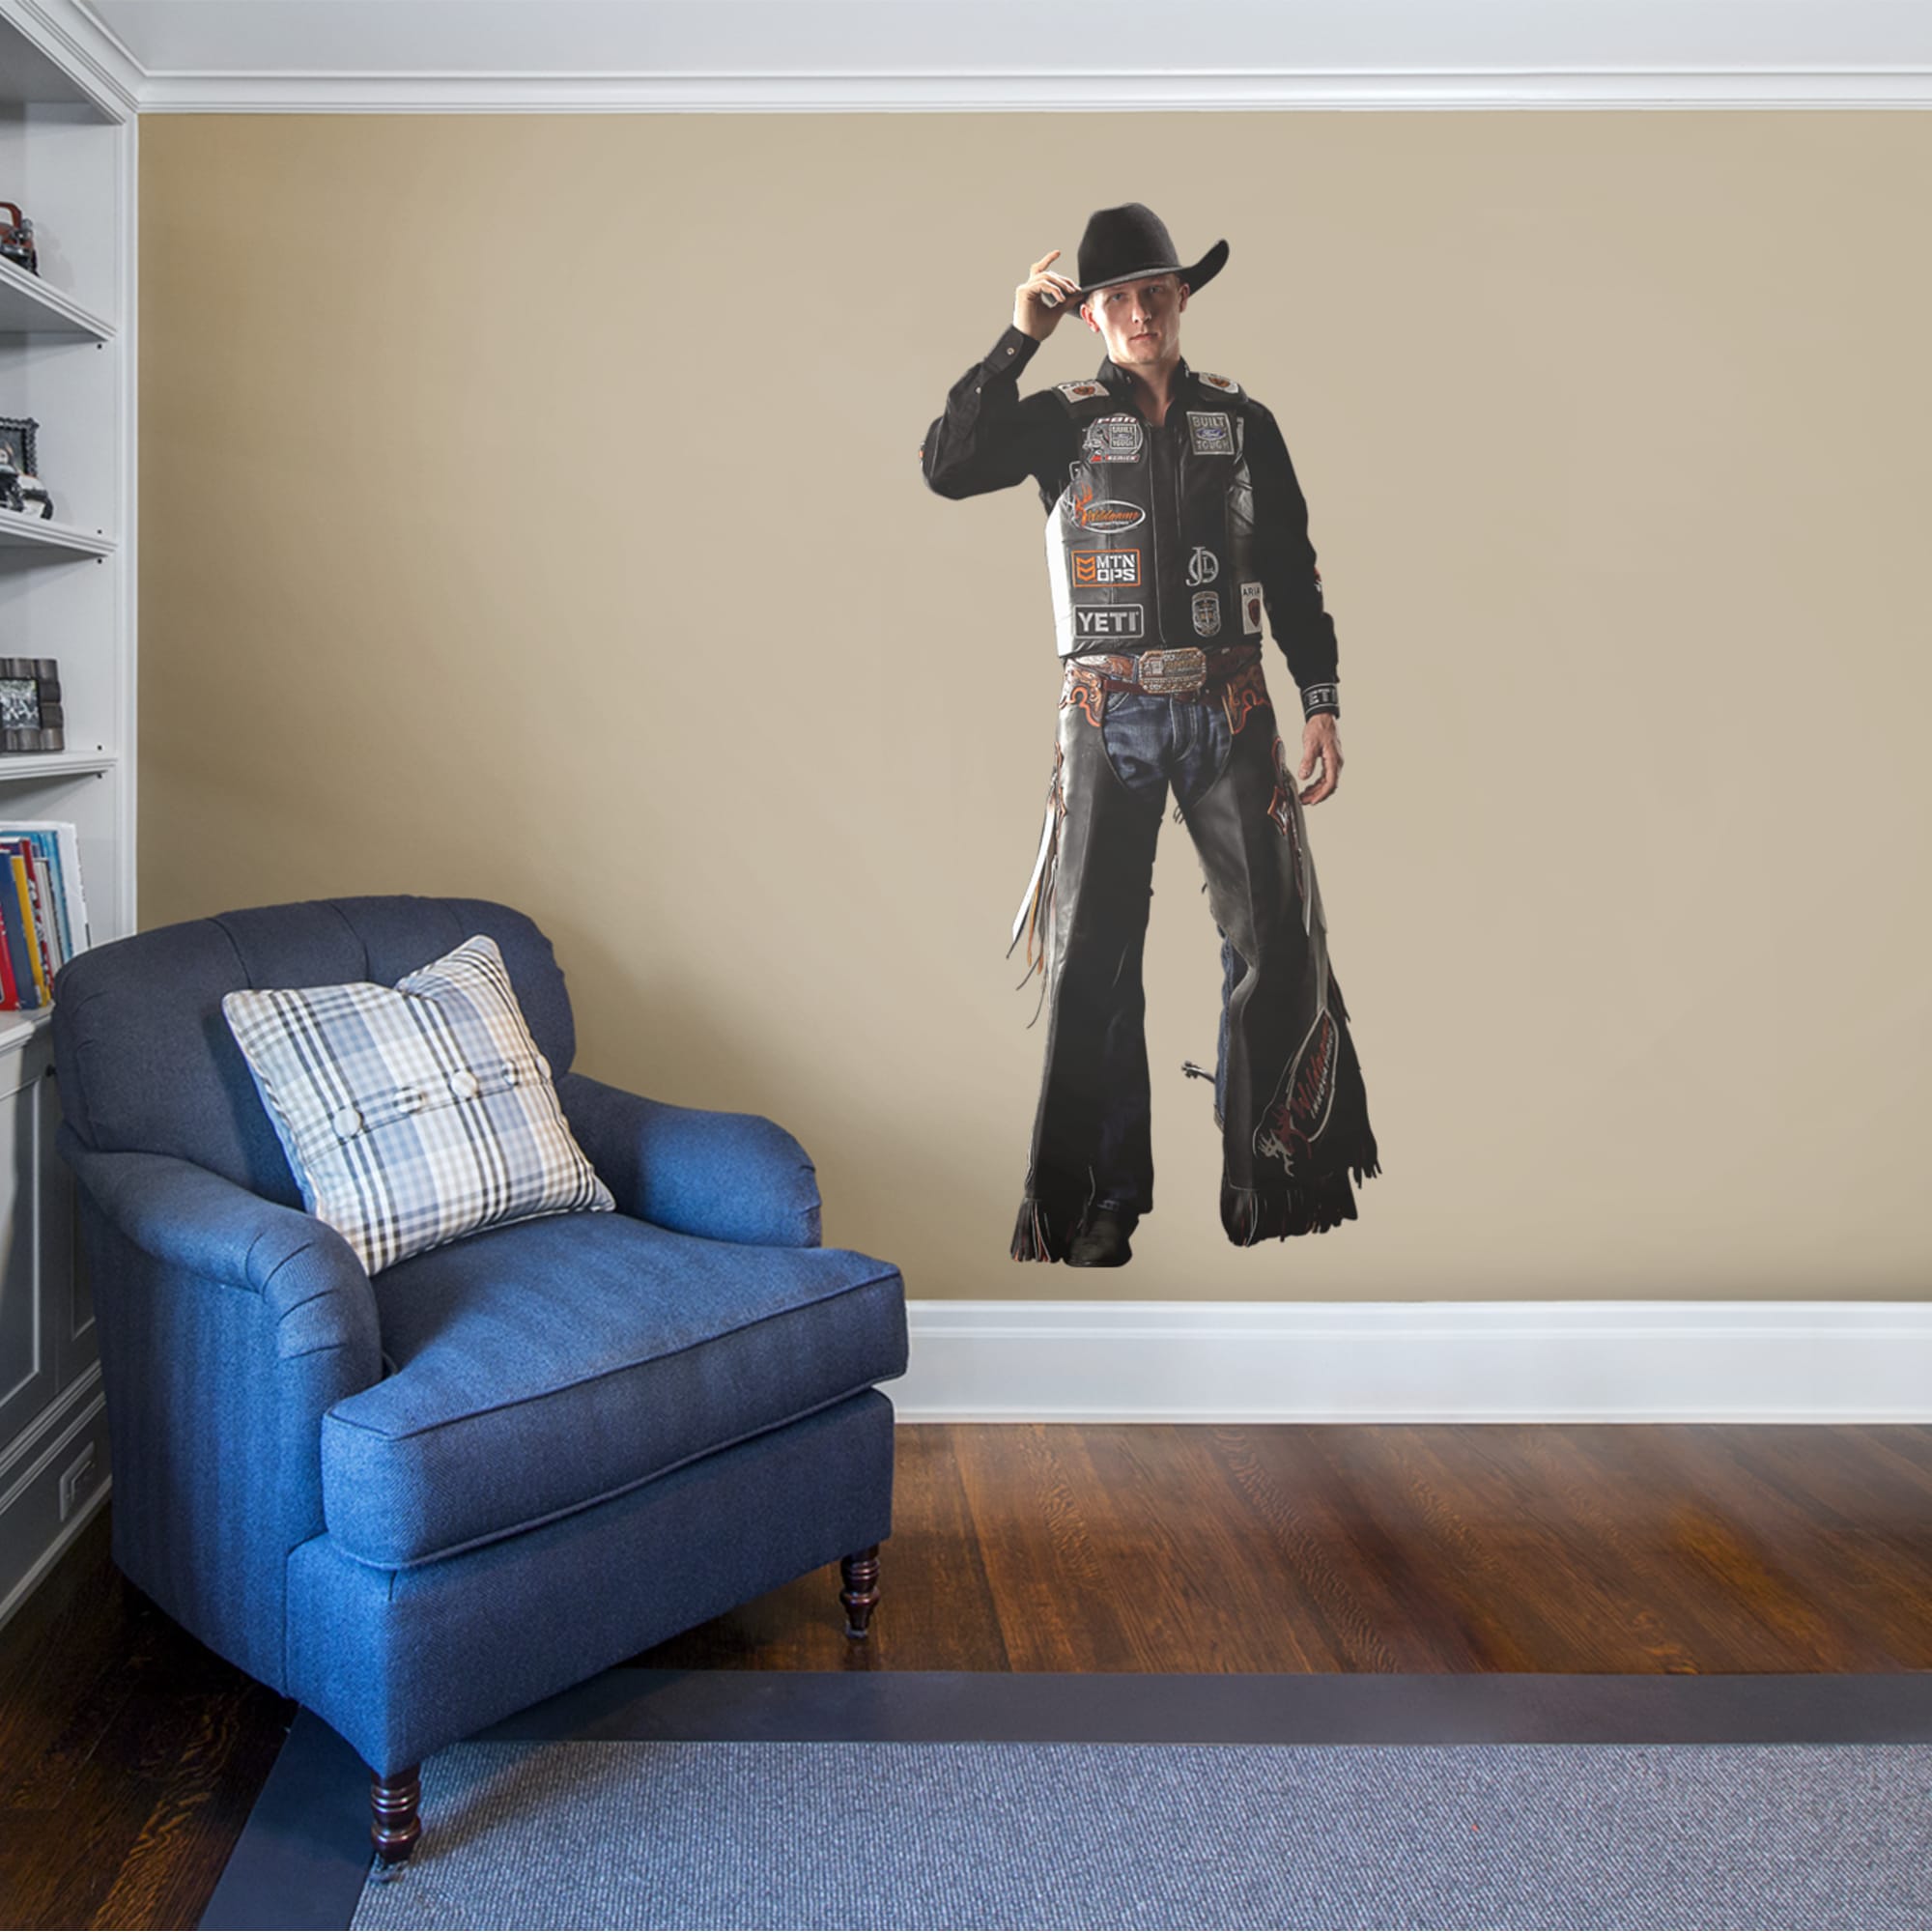 Cooper Davis - Officially Licensed Removable Wall Decal by Fathead | Vinyl